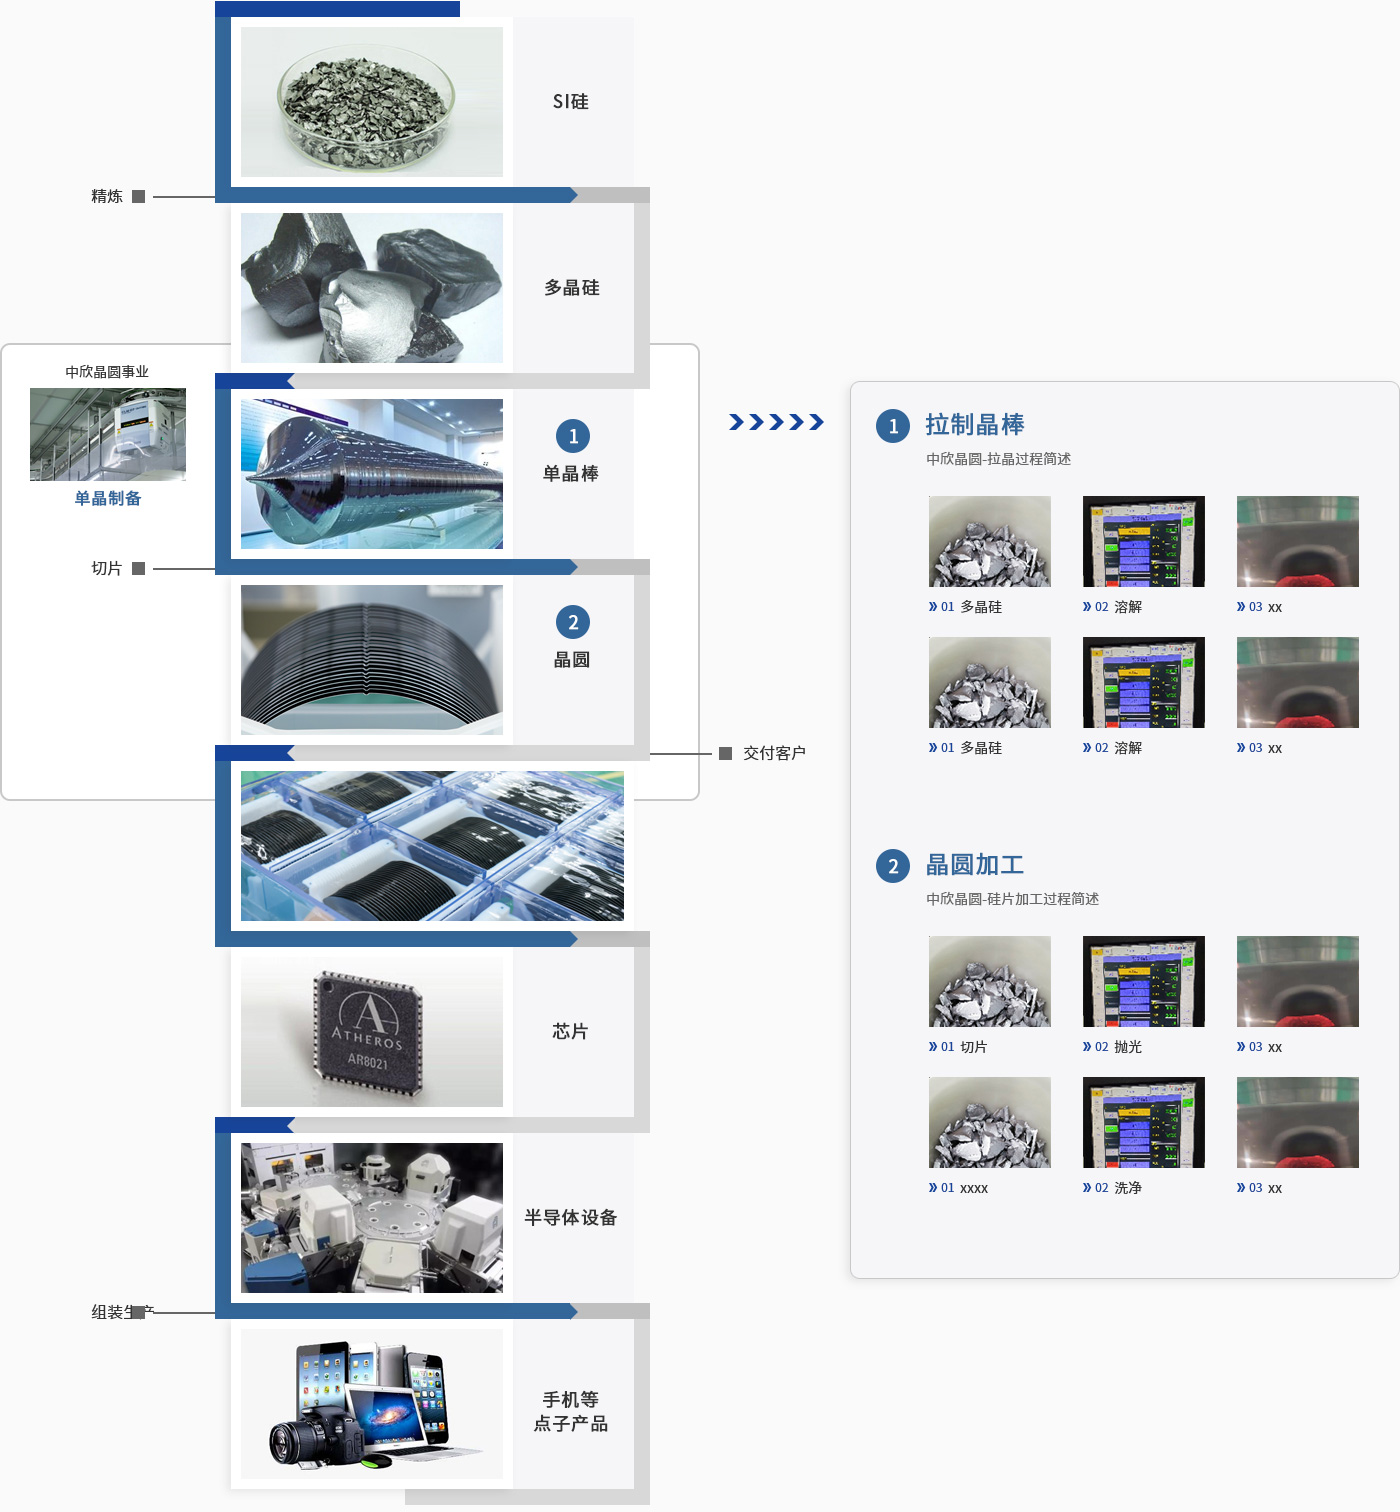 The whole process from silicon wafer manufacturing to electronic product manufacturing